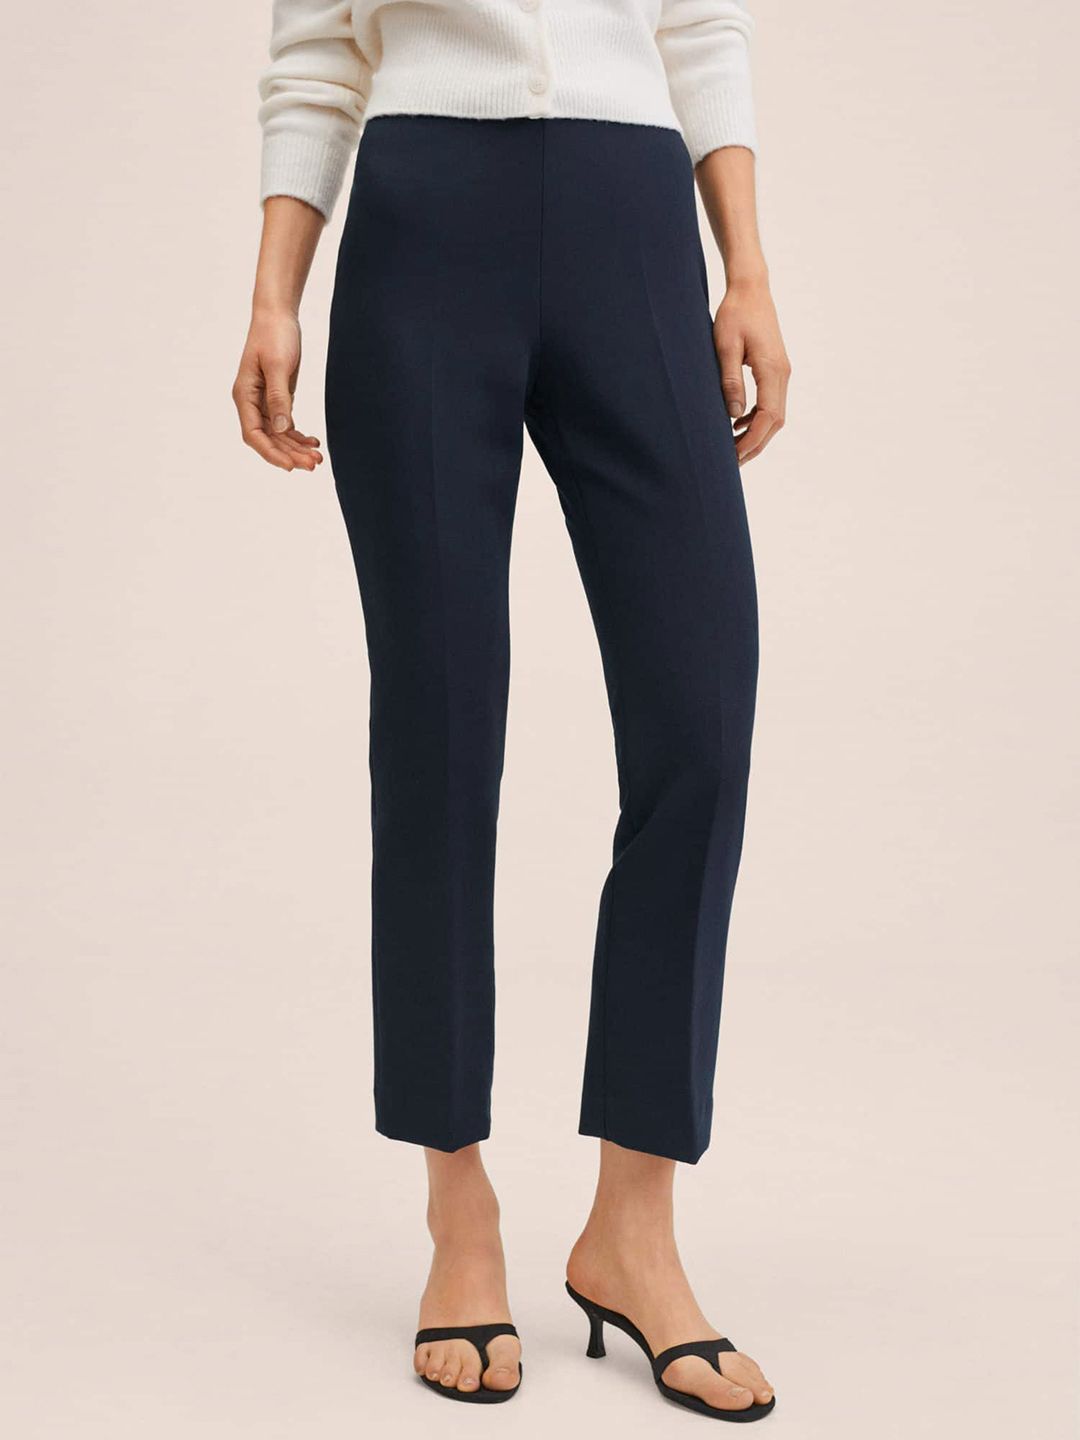 MANGO Women Navy Blue Cropped Trousers Price in India